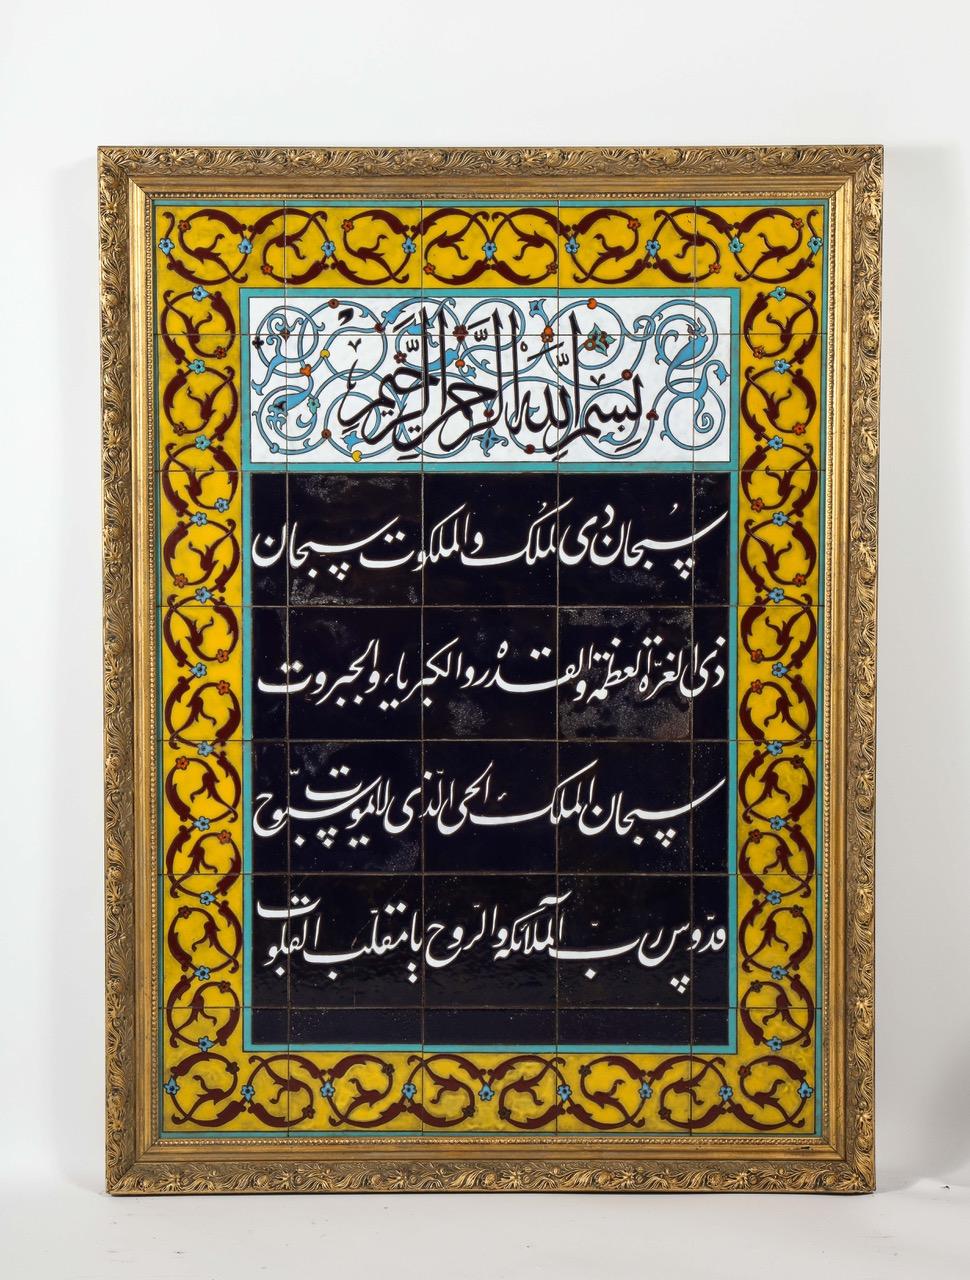 Exceptional Pair of Islamic Middle Eastern Ceramic Tiles with Quran Verses 6